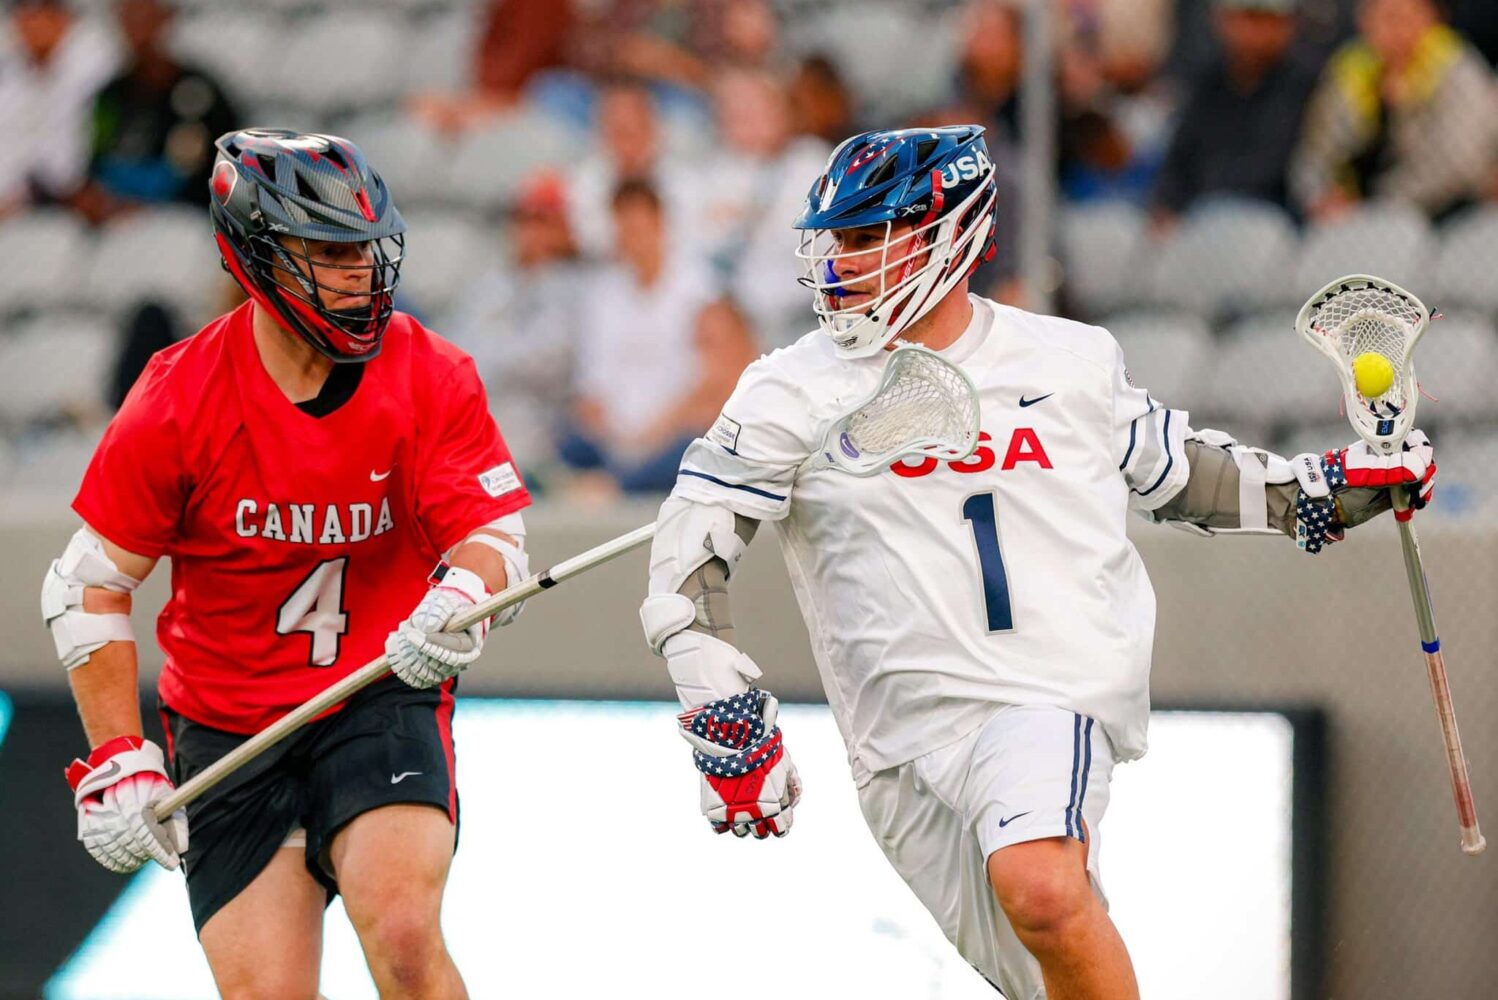 A Canada defender guards a USA player during the World Lacrosse Men's Championship.